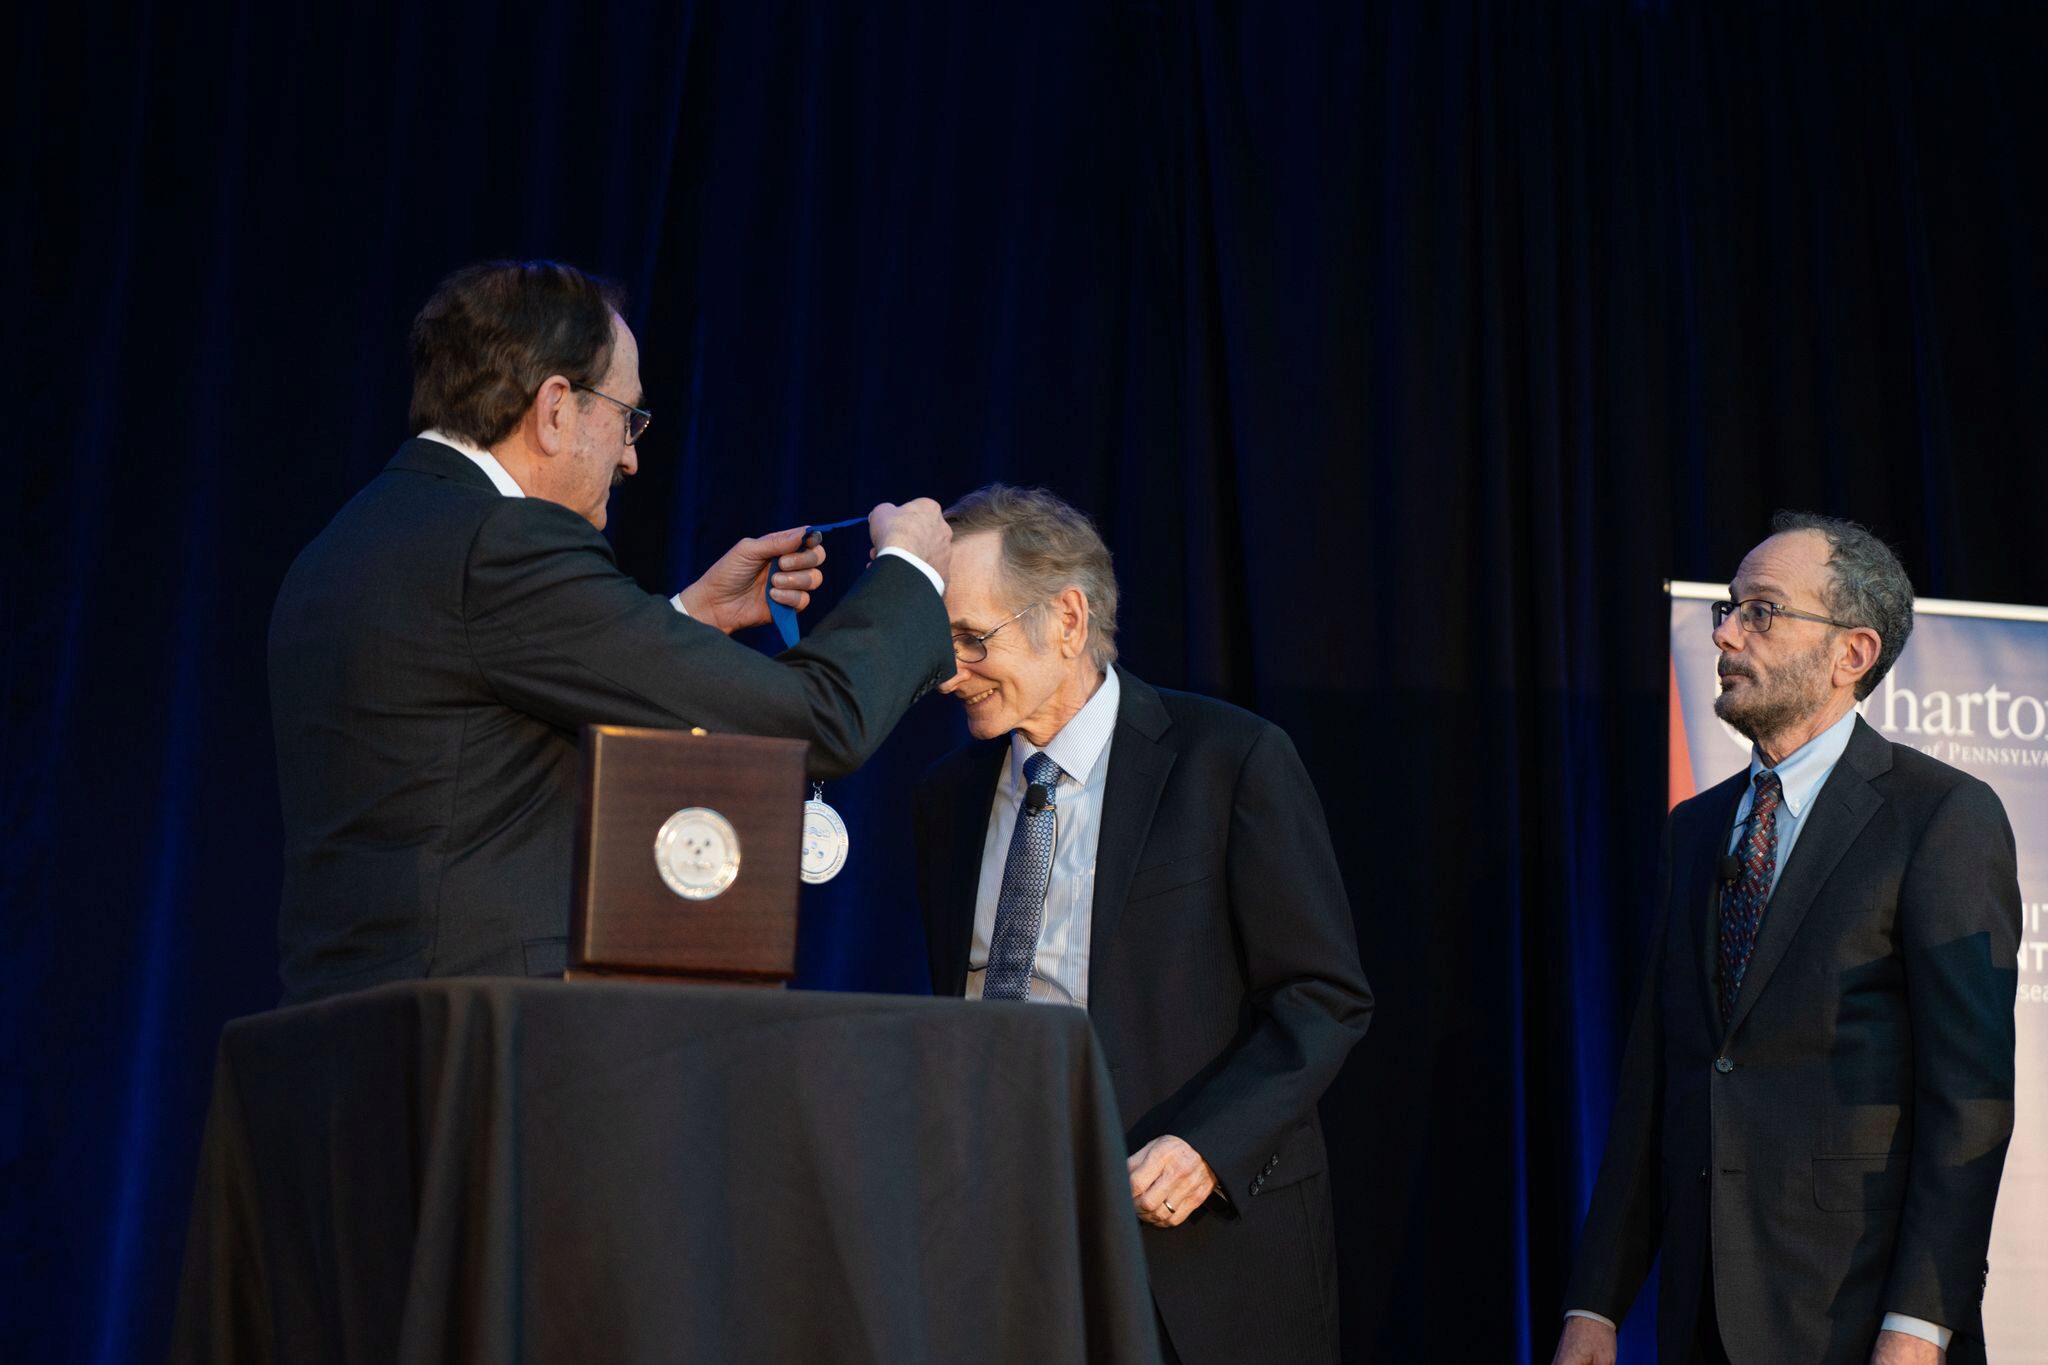 Bruce Jacobs places a medal over Albert S. “Pete” Kyle's head. Ken Levy watches.